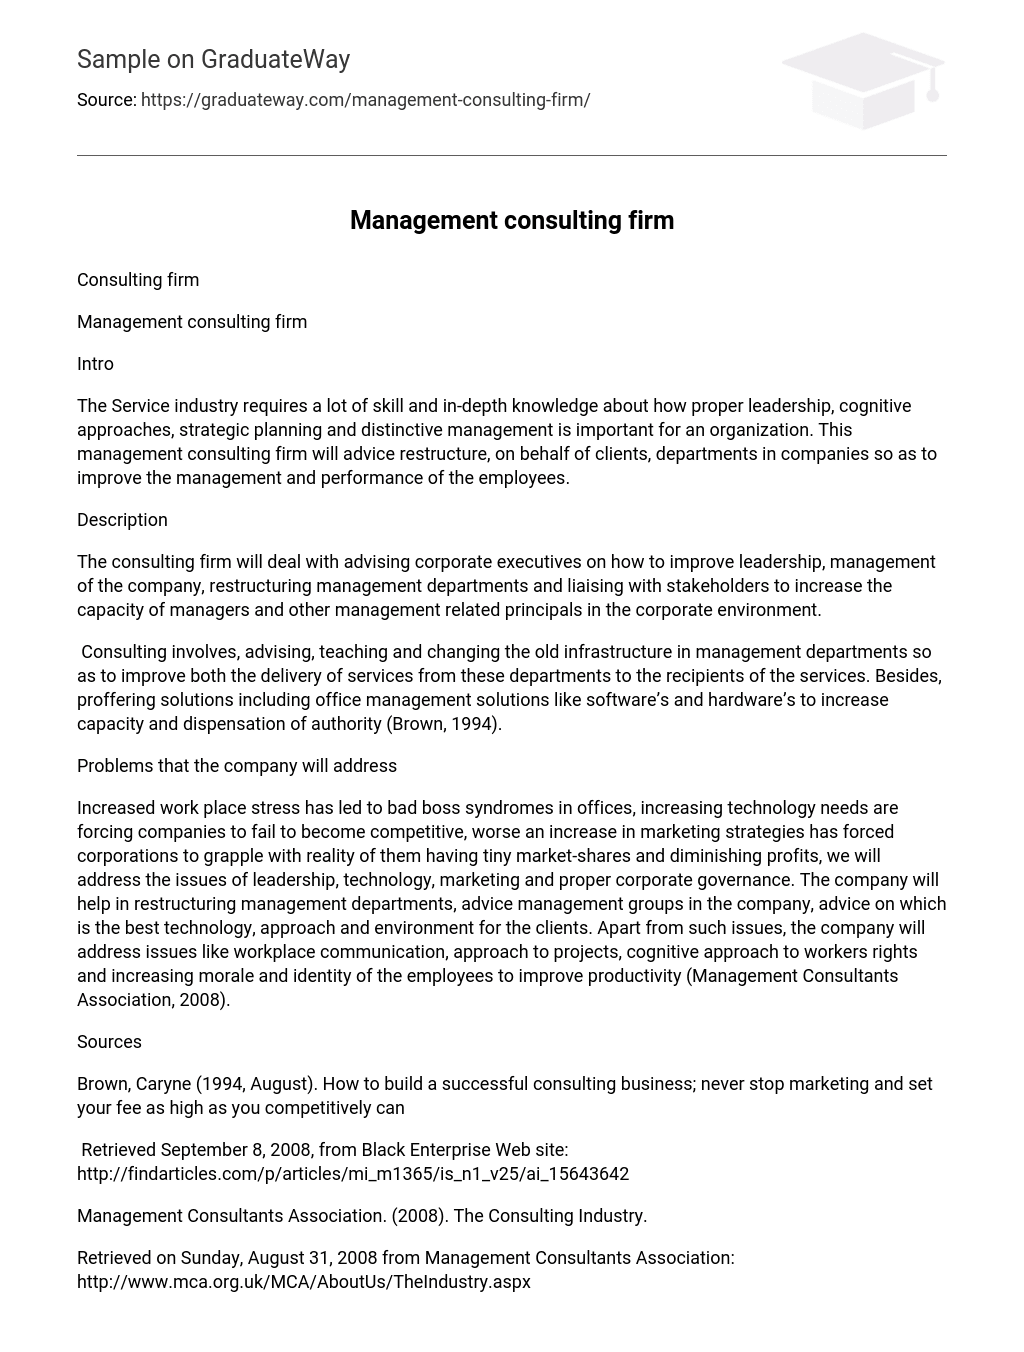 Management consulting firm